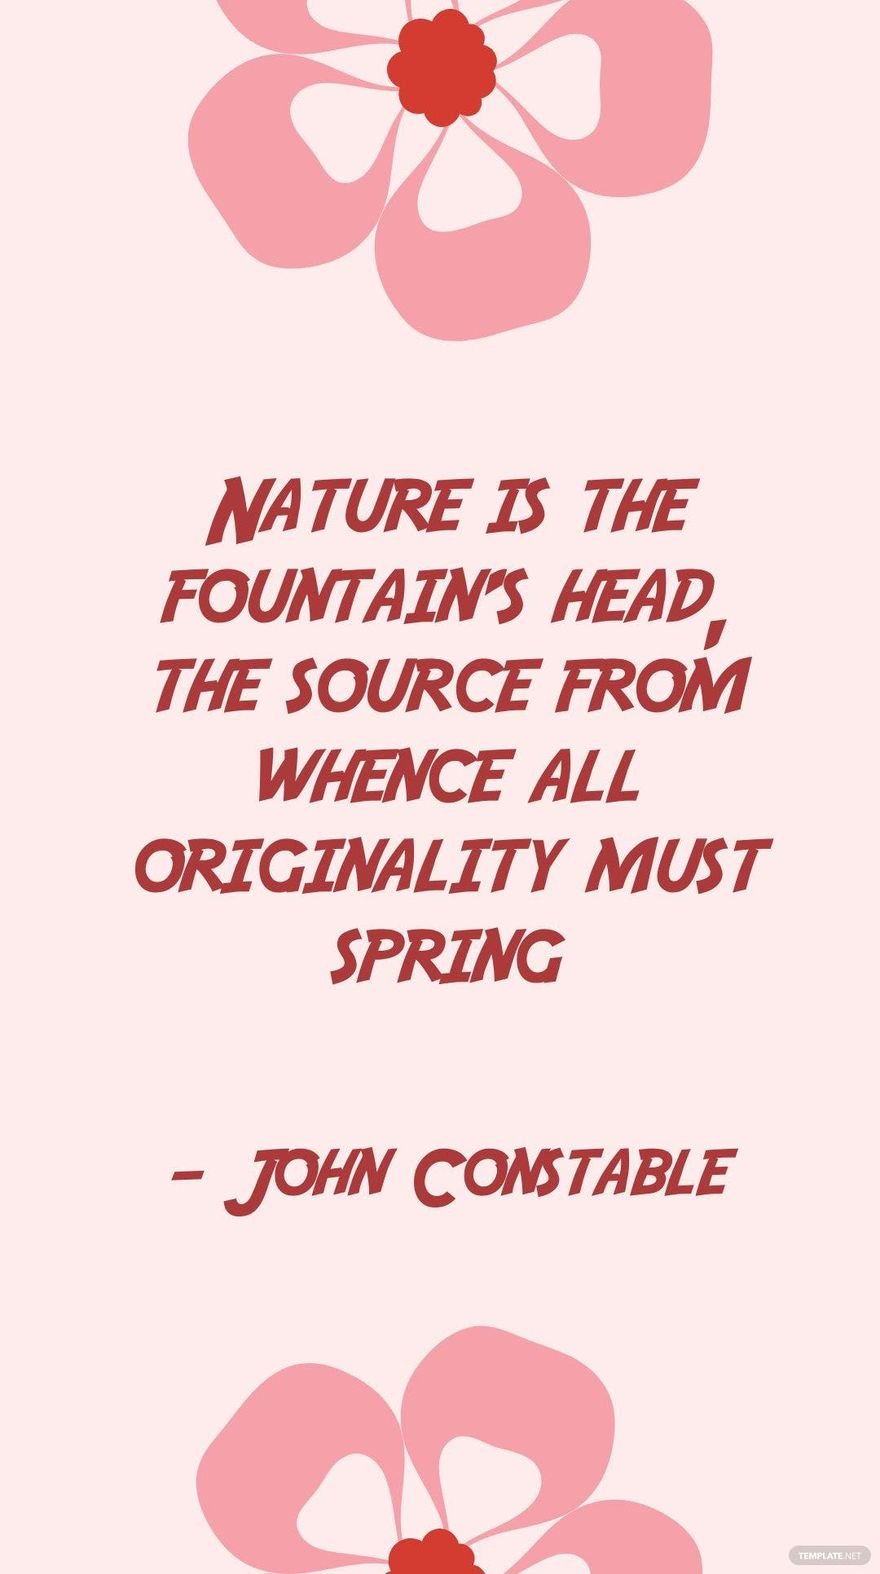 John Constable - Nature is the fountain's head, the source from whence all originality must spring in JPG